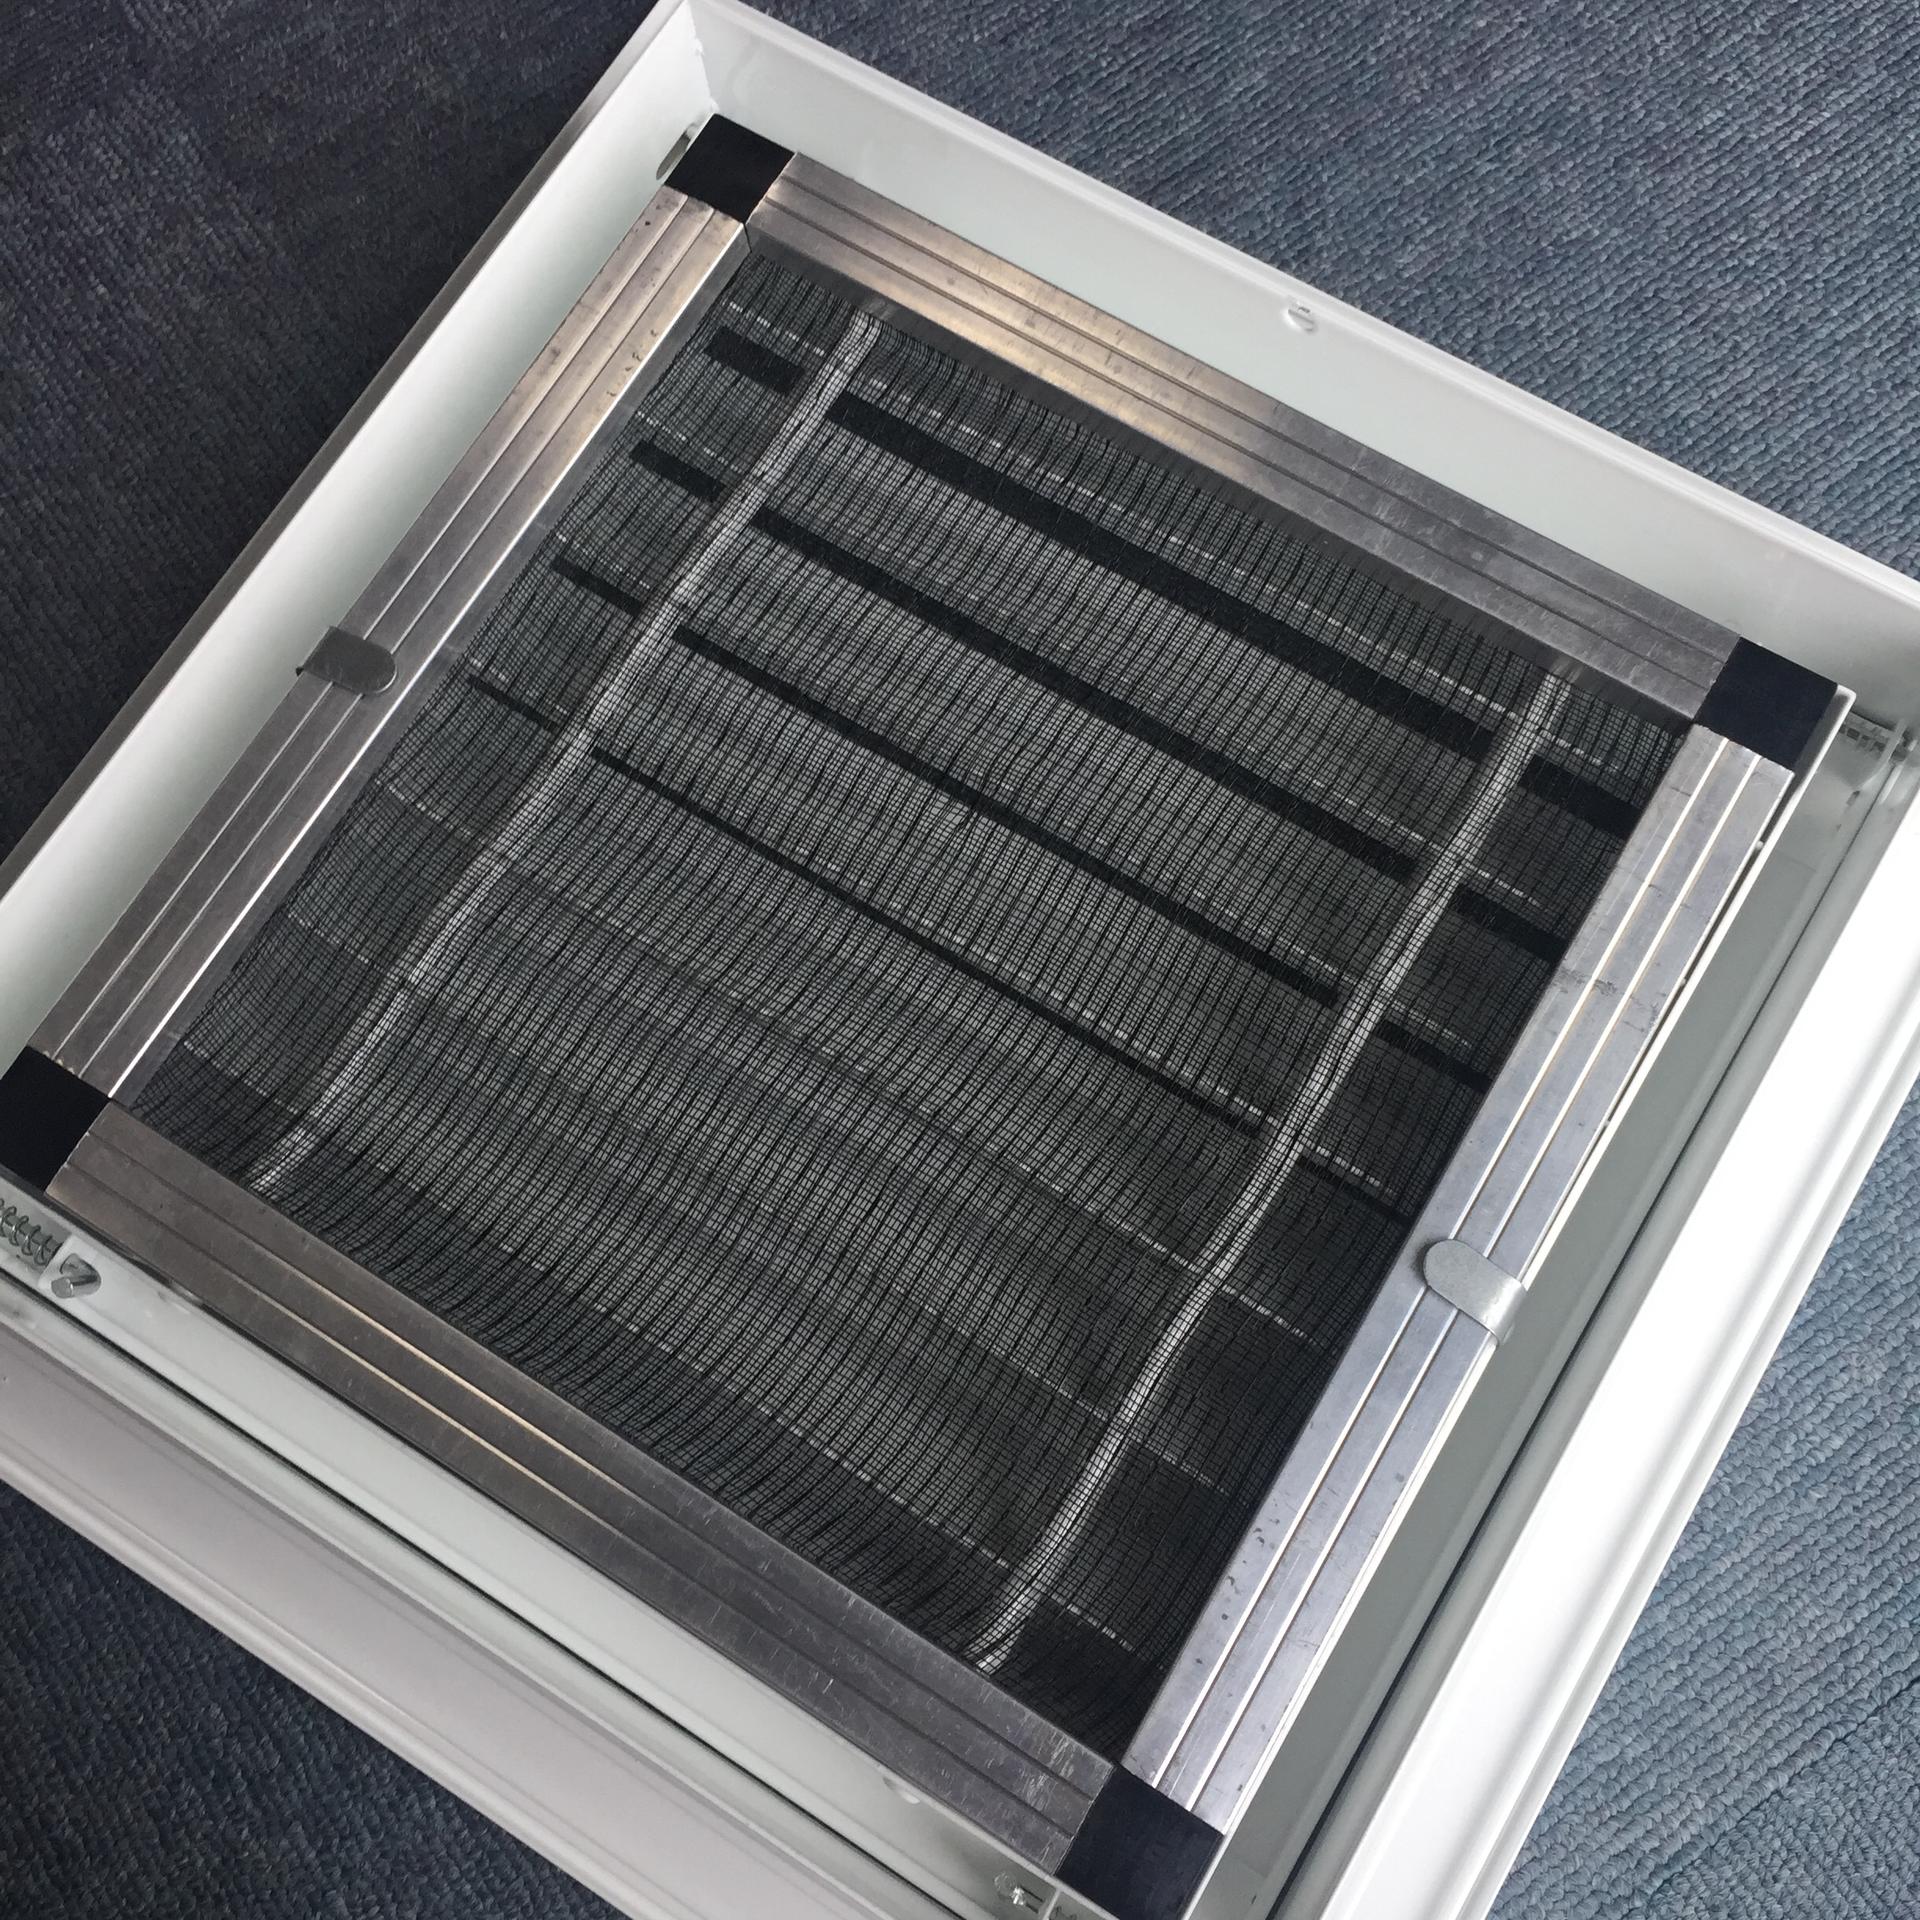 HVAC System Hinged Core Aluminum Air Vent Wall Air Grille for Ventilation